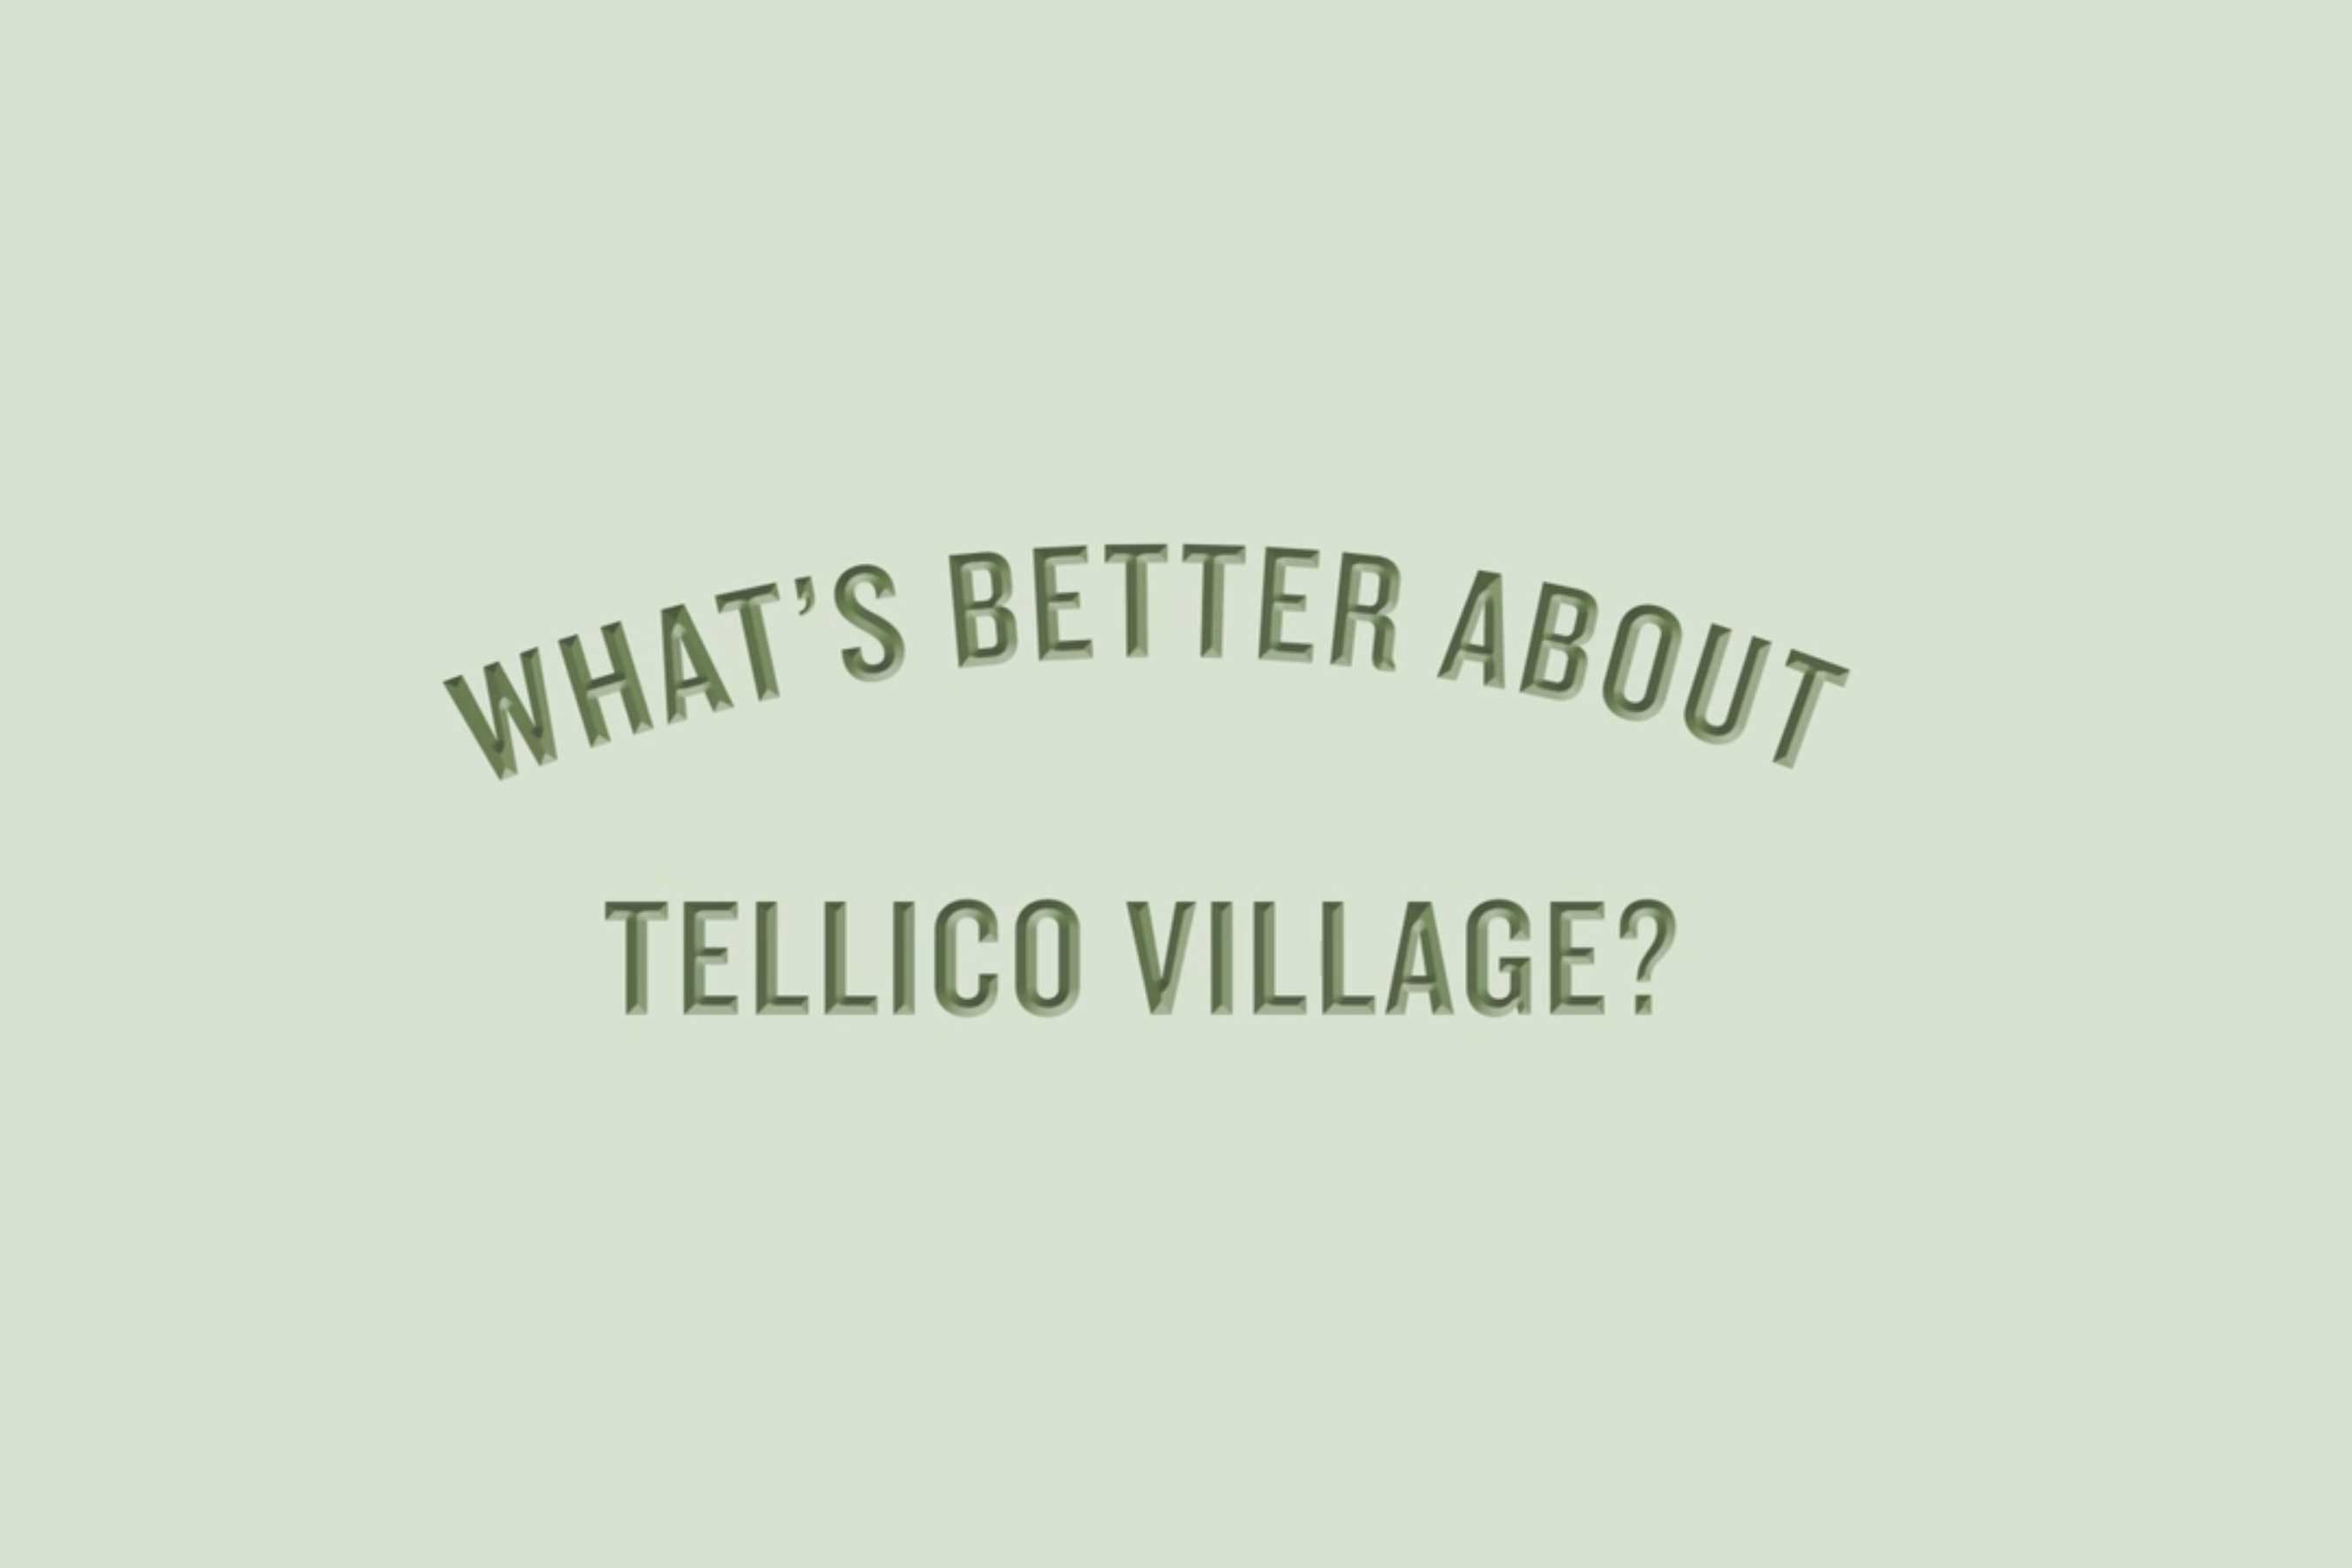 Tellico Village has more than 7,000 residents who come from all across the country and several foreign countries. This diverse group of people has created a friendly, welcoming community and a special way of life.